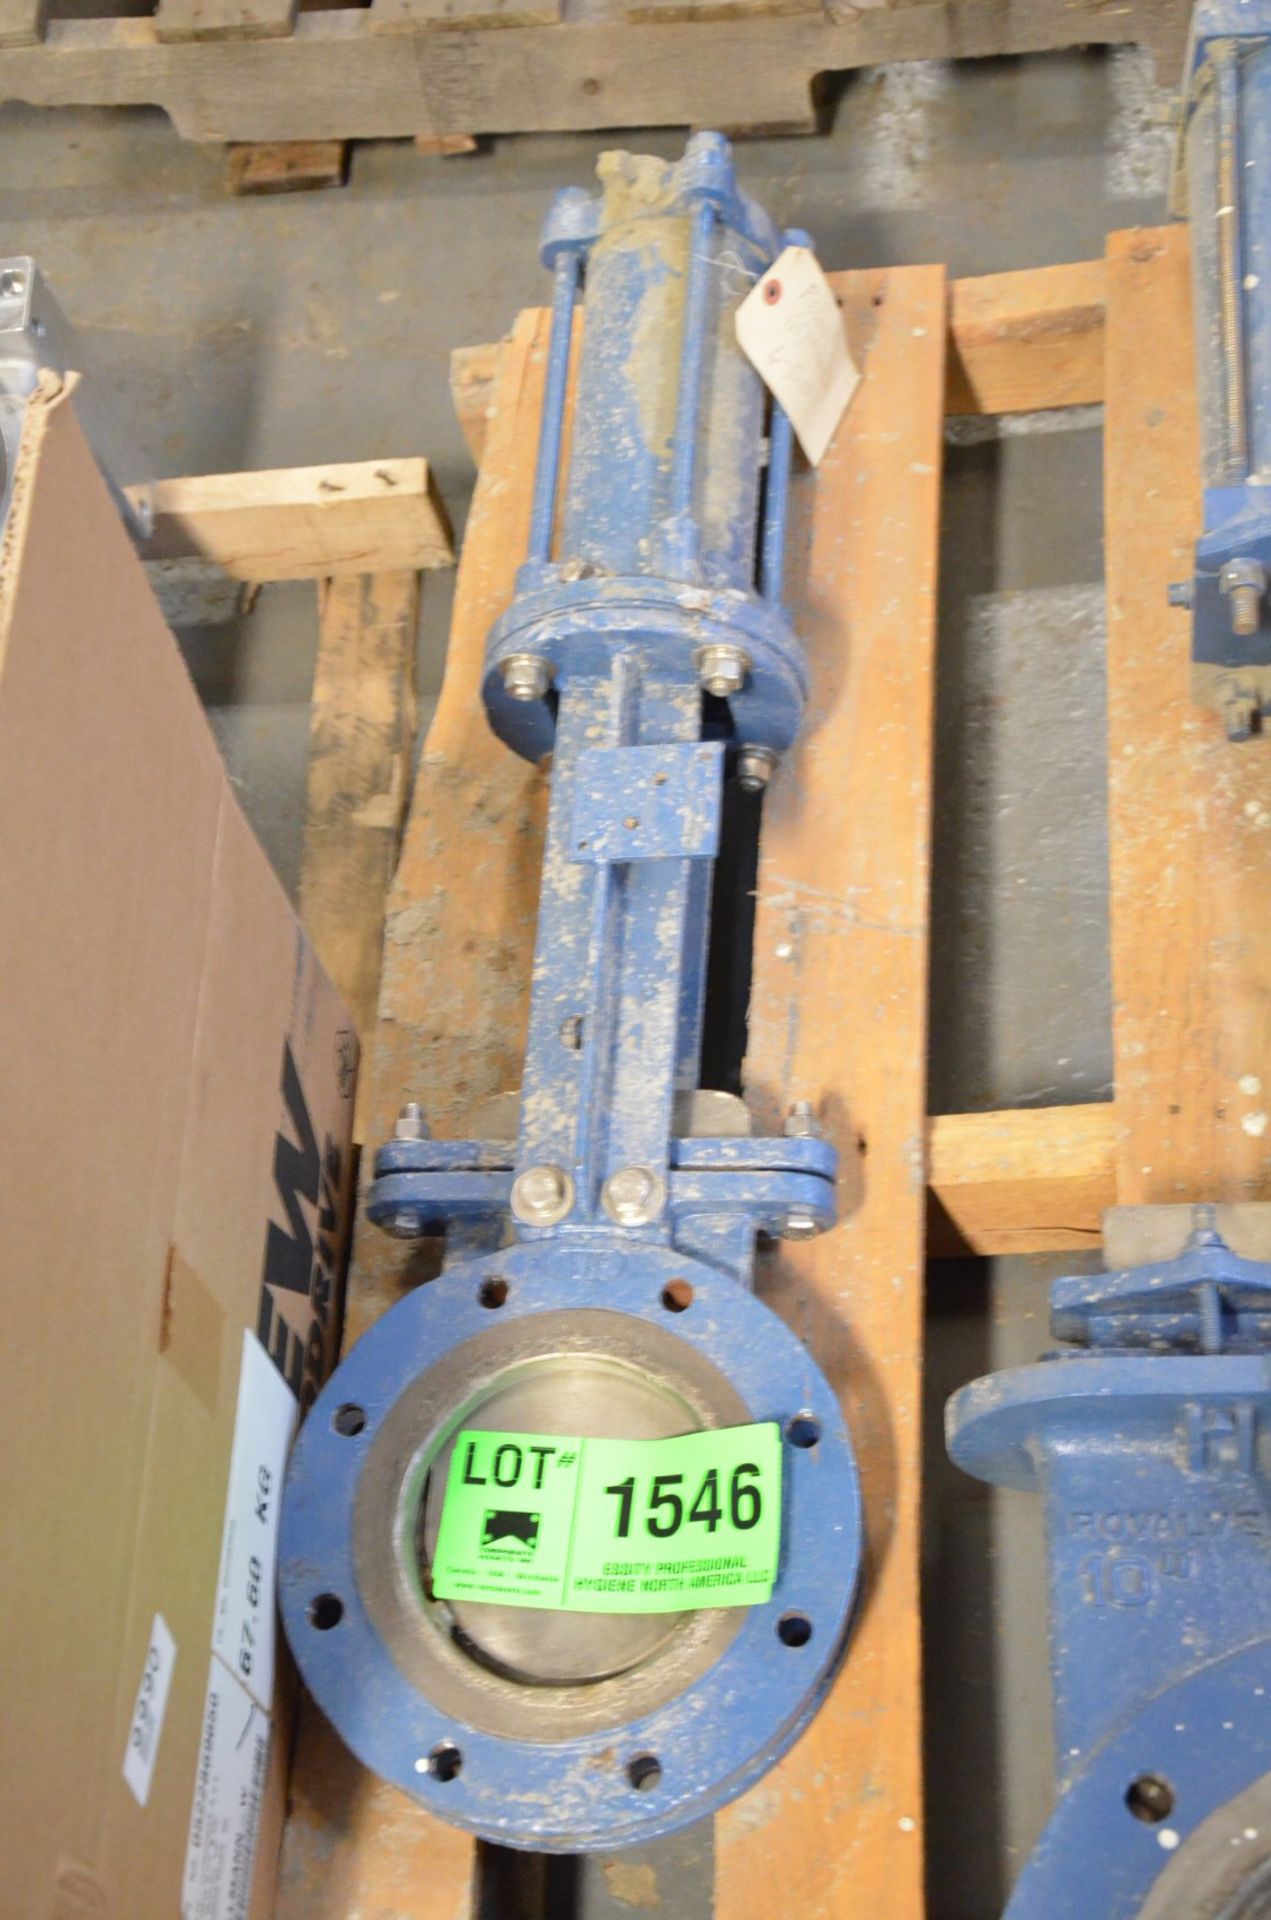 DEZURIK 6" AUTOMATIC VALVE [RIGGING FEE FOR LOT #1546 - $25 USD PLUS APPLICABLE TAXES]